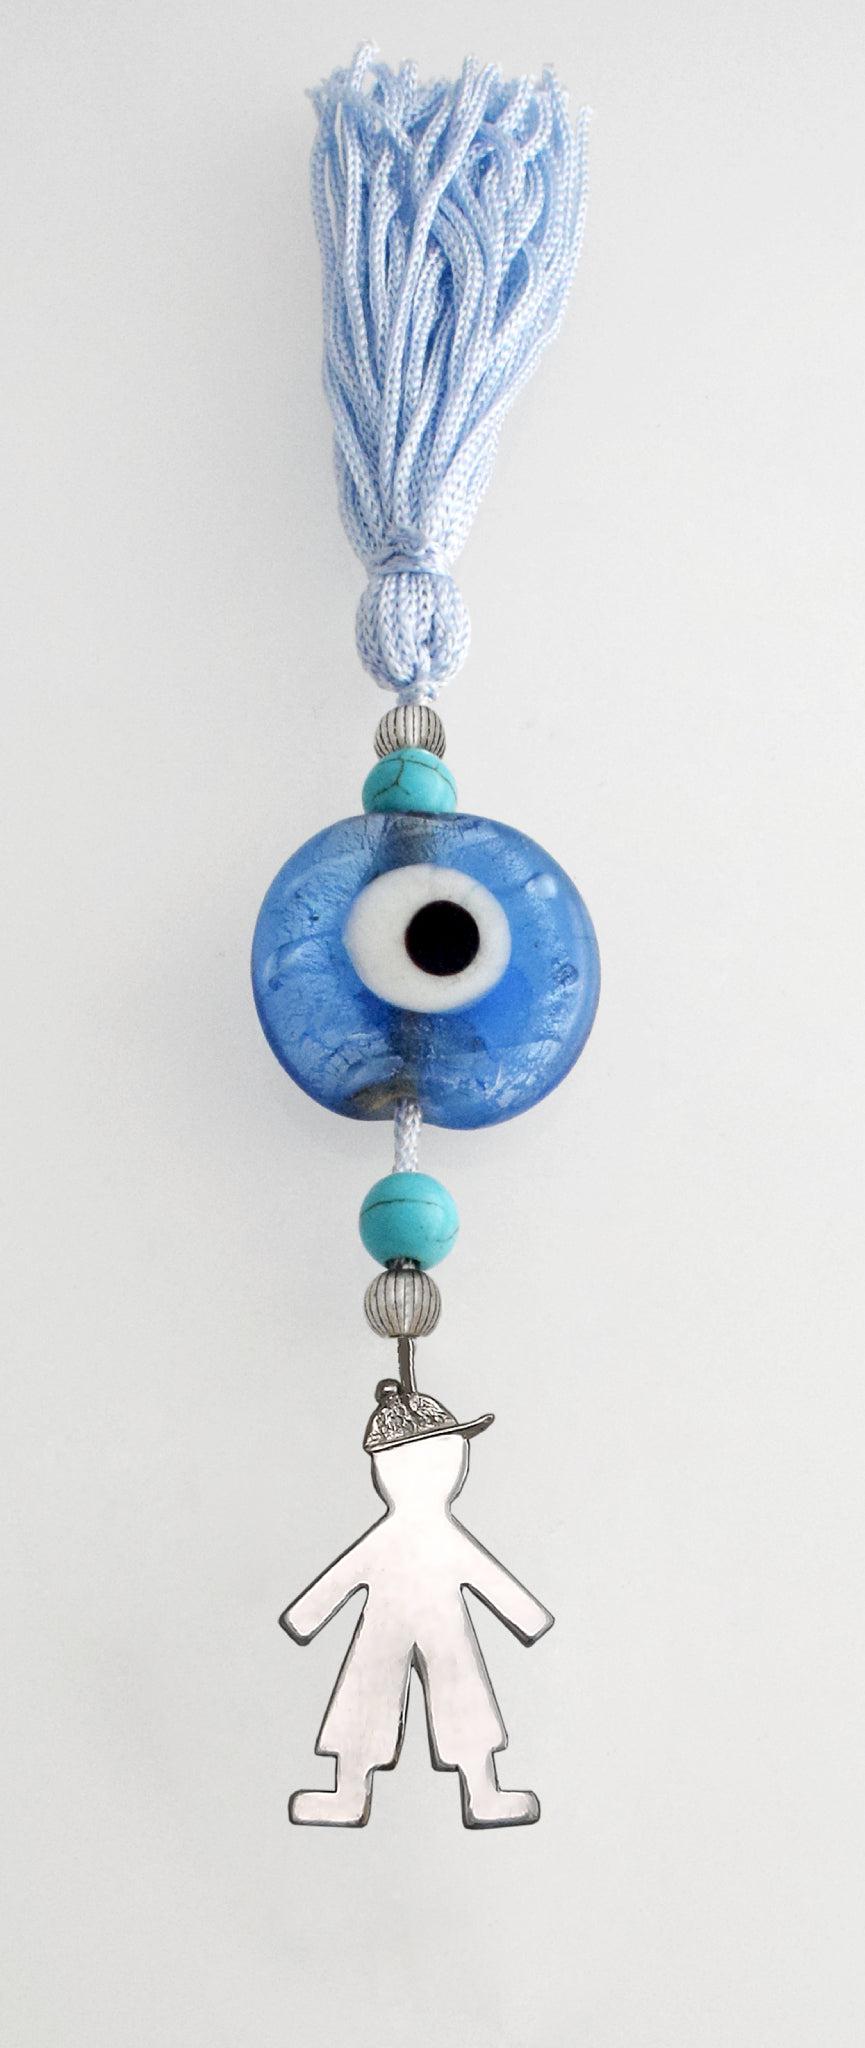 Evil Eye Charm on a tassel, House decoration, holiday decor, welcome gift, silver charm, Baby boy Charm - ELEFTHERIOU EL